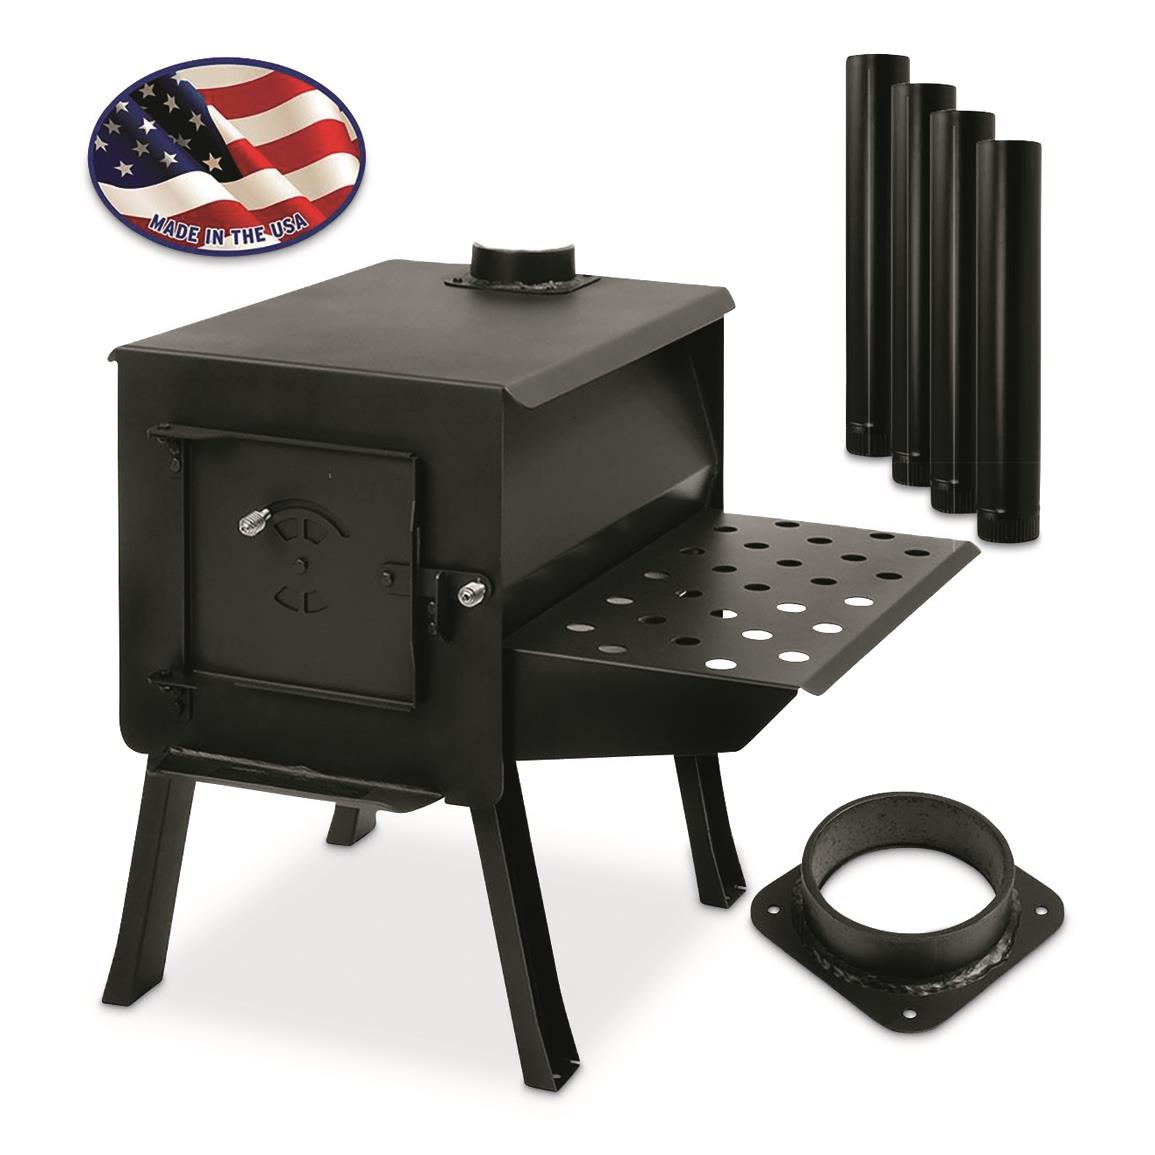 Complete Kit includes Stove, pipe collar, 8' pipe kit, and attachable shelf